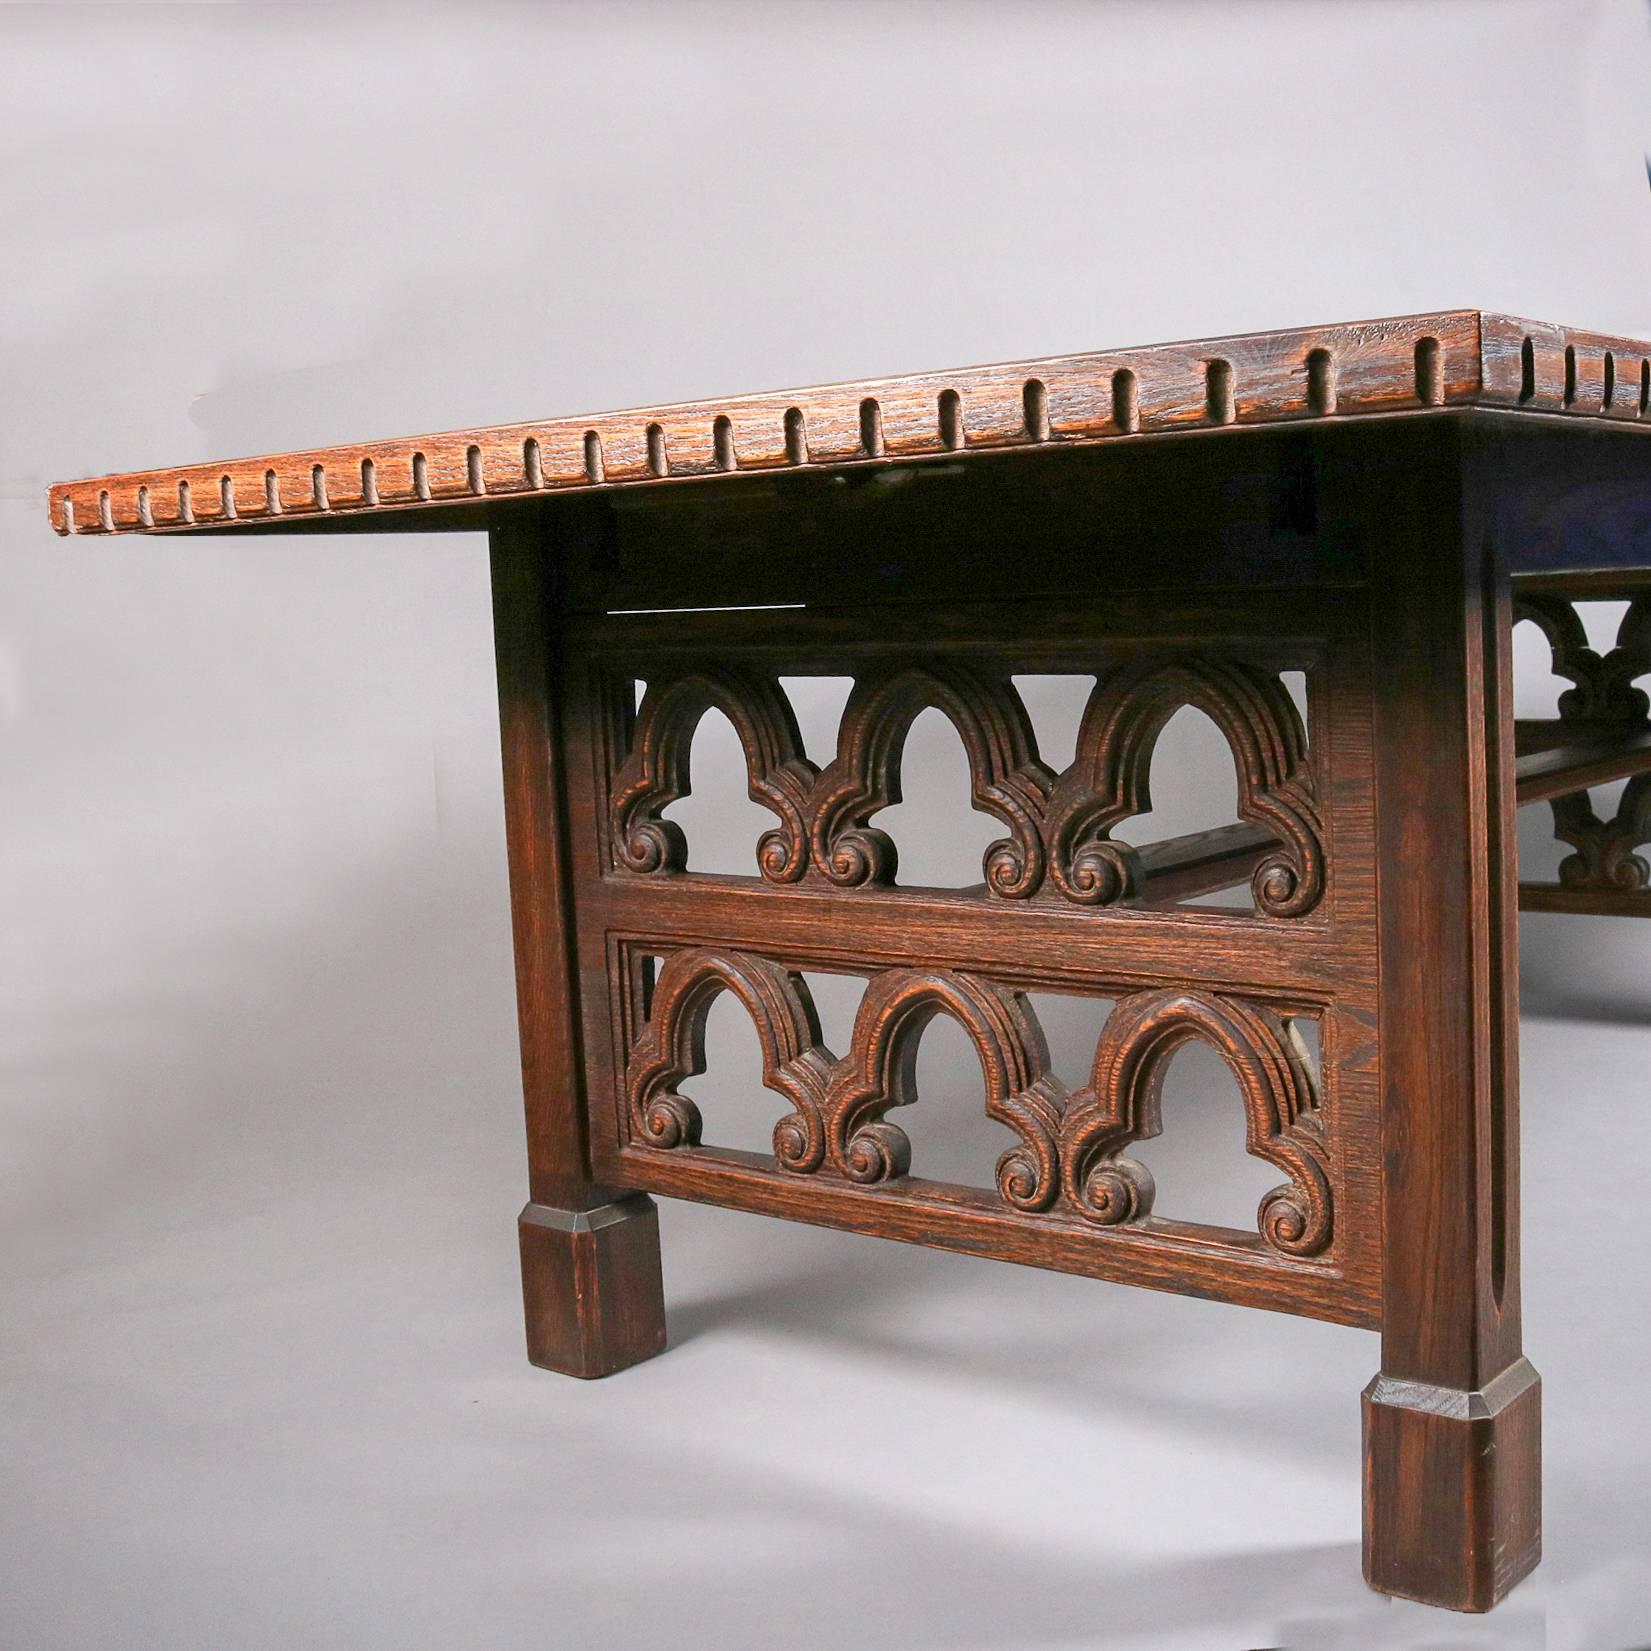 Antique English Carved Walnut Gothic Trestle Table With 2 Leaves, 19th Century 3